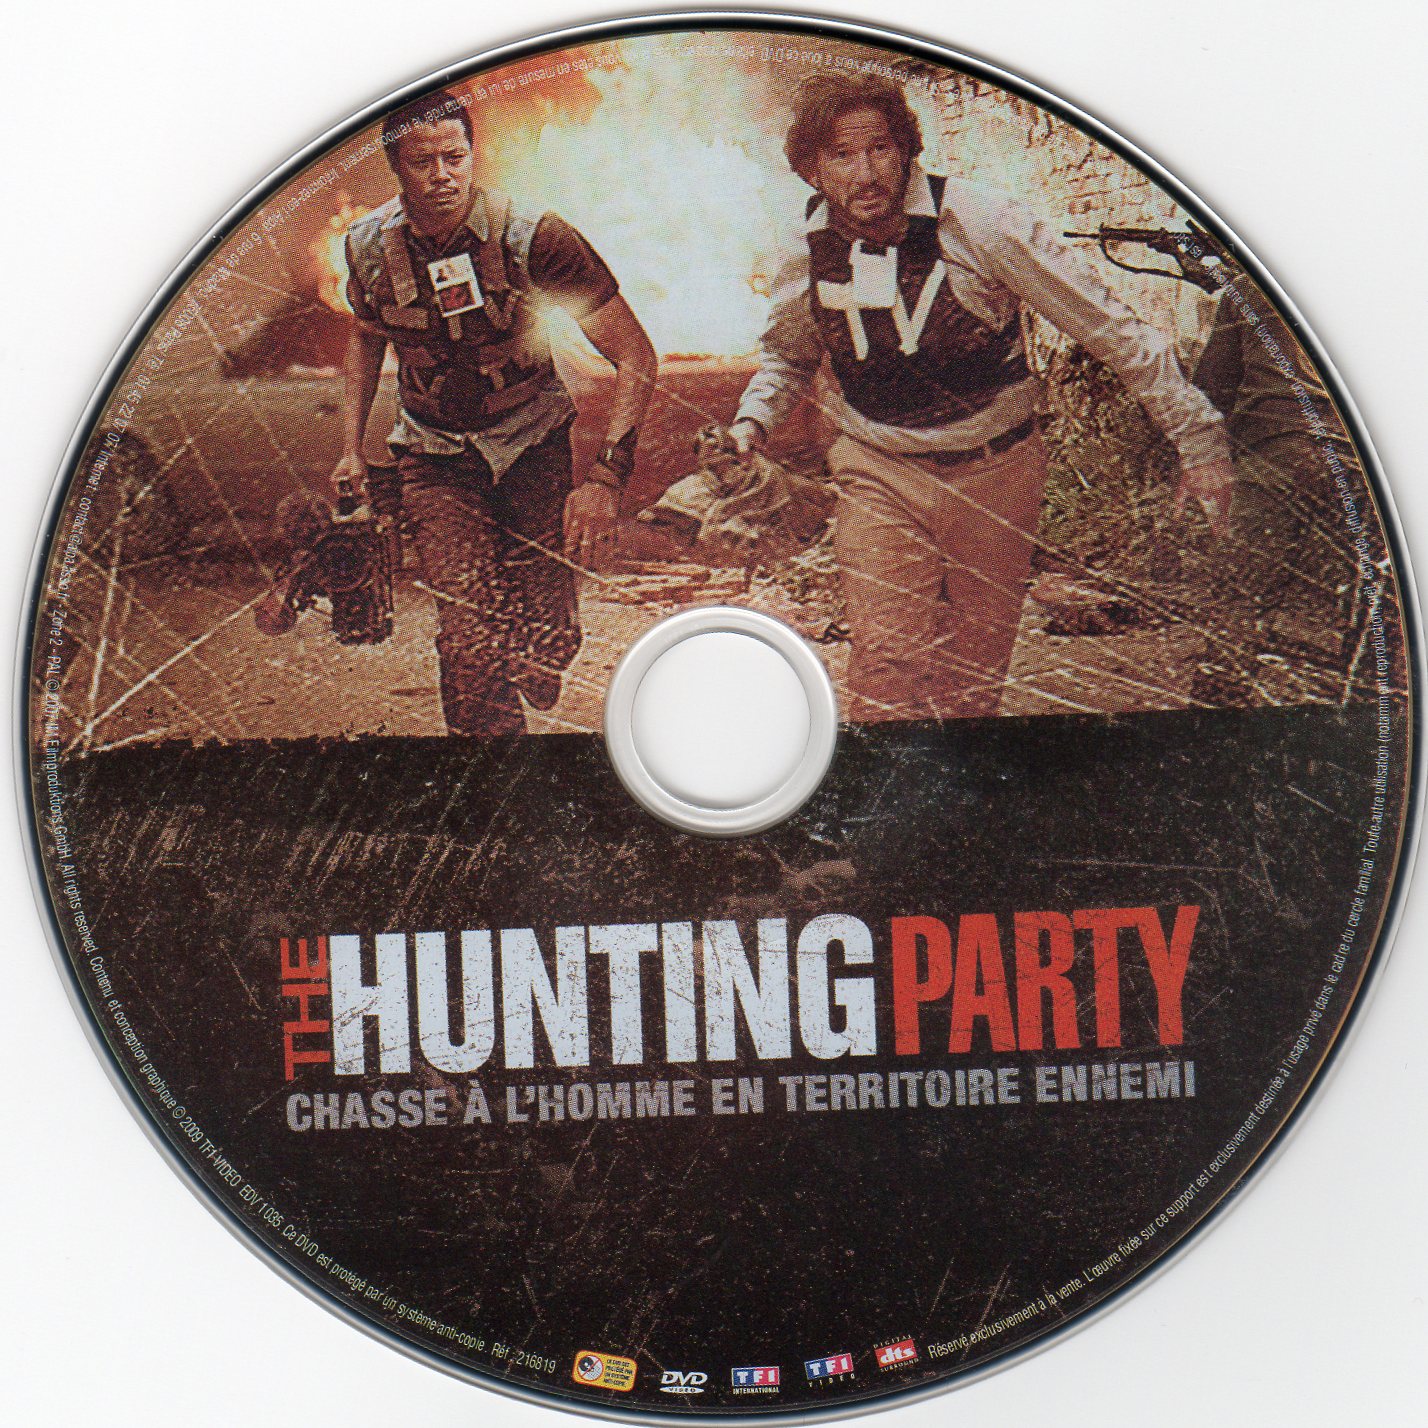 The hunting party v2